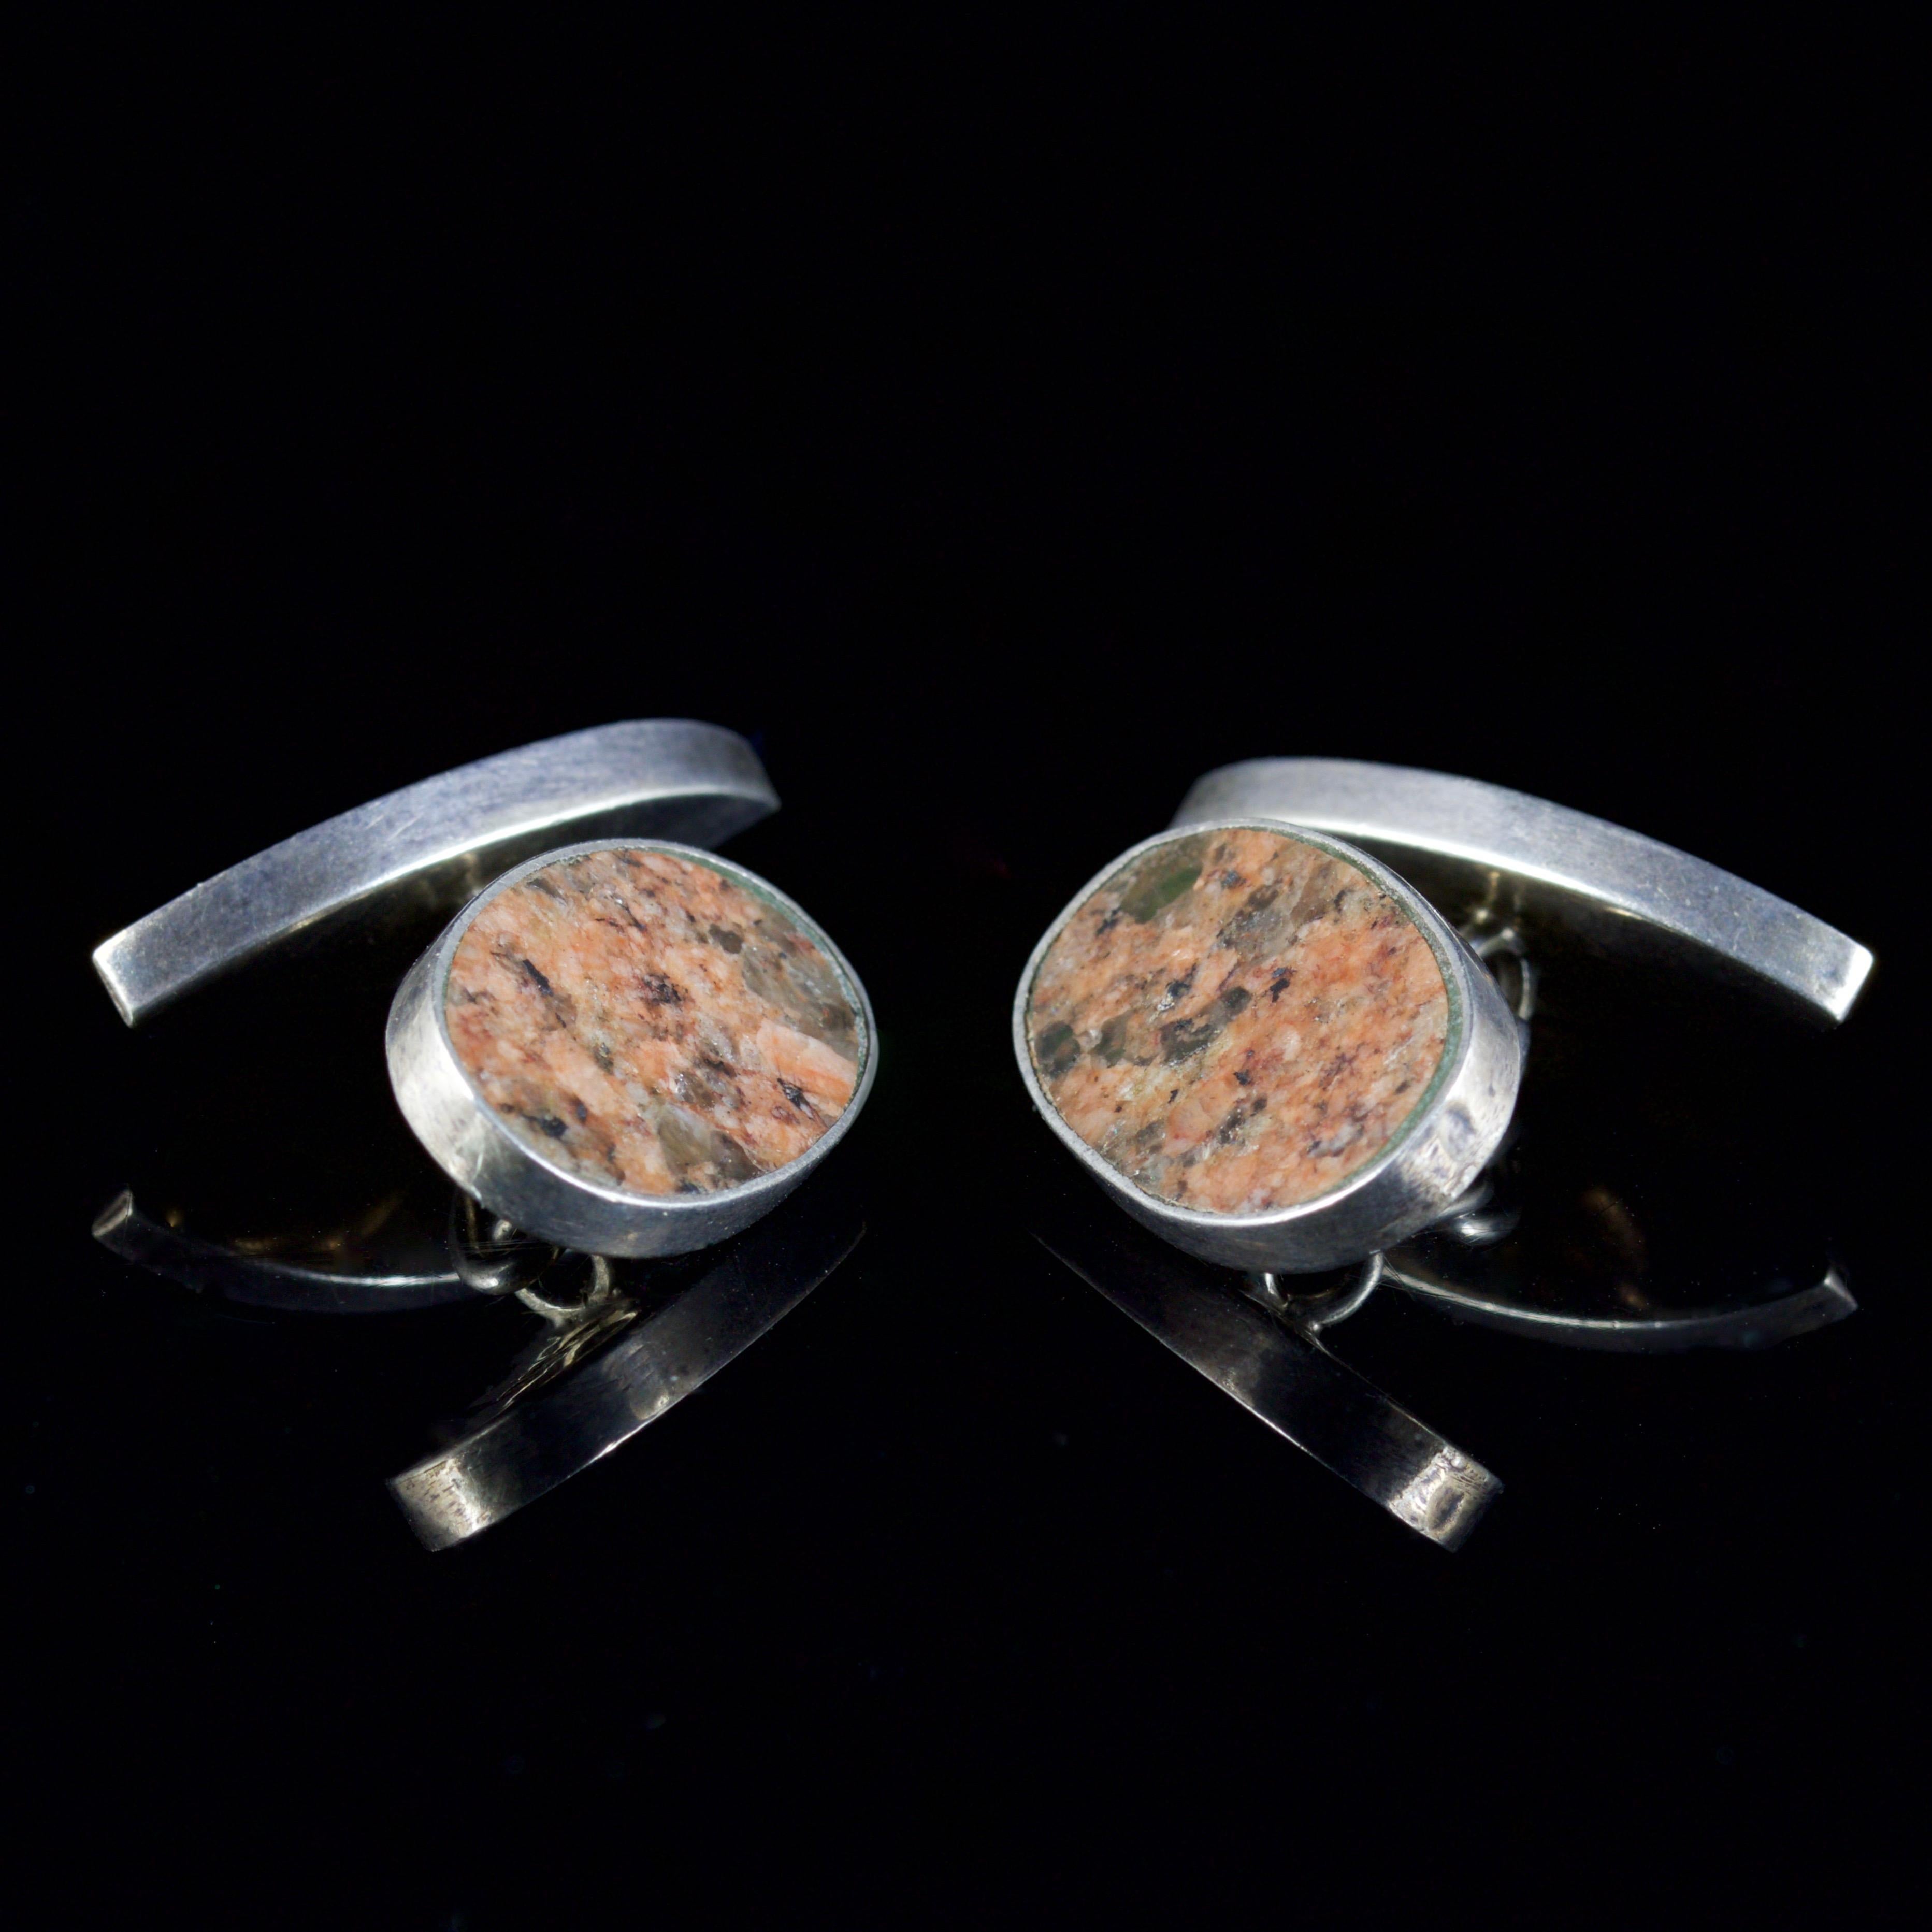 These wonderful Victorian Silver Scottish pebble cufflinks, Circa 1880

Scottish jewellery was made popular by Queen Victoria as it became a souvenir of her frequent trips to Scotland and her Scottish Castle Balmoral from the mid 1800s. 

The